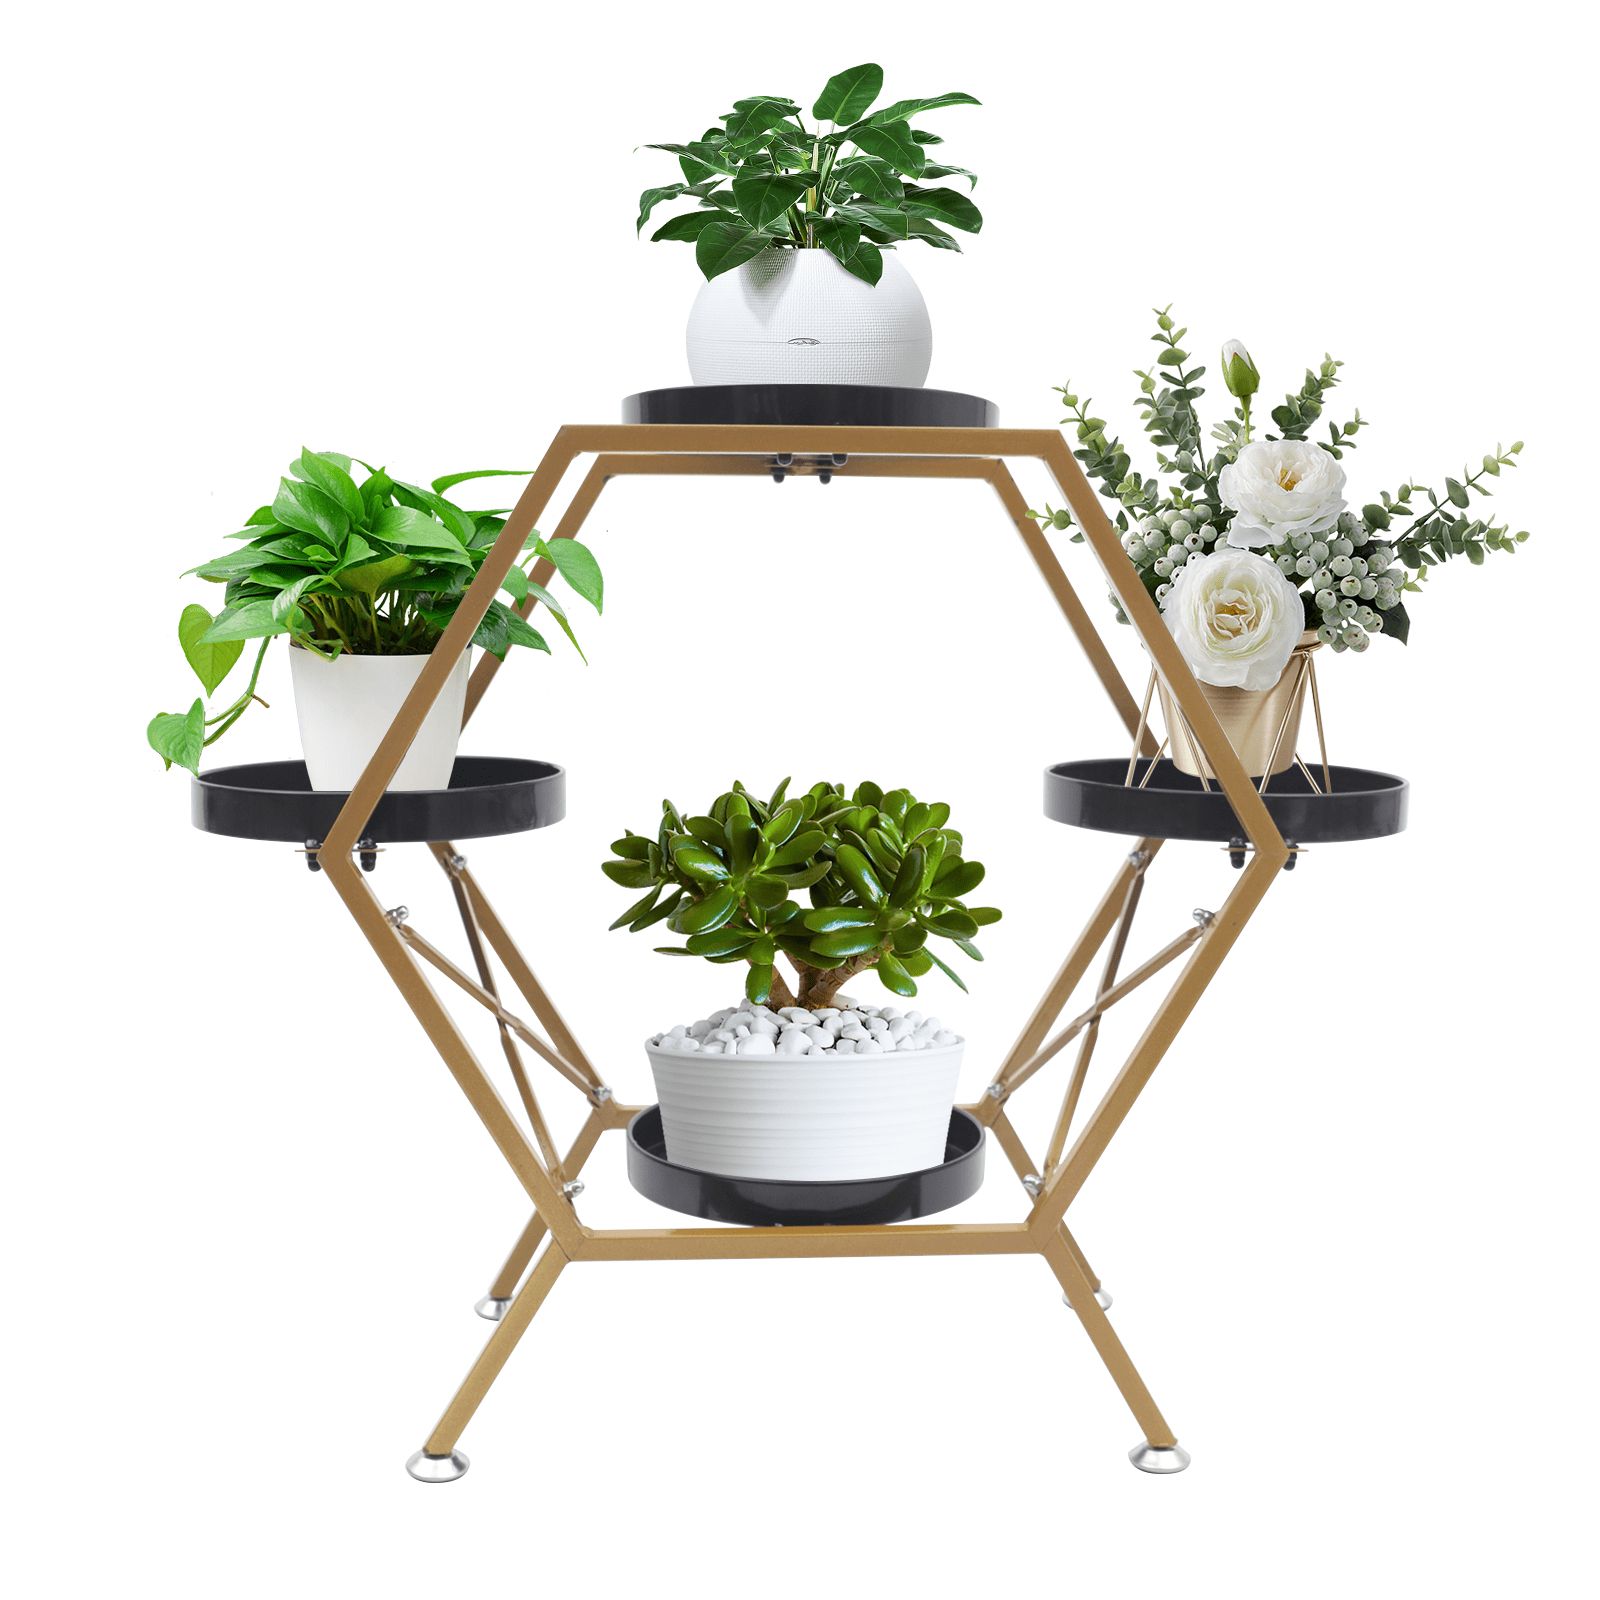 Ethedeal Hexagon Gold Metal Plant Stand 4 Trays Flower Pot Holder Display  Garden Balcony – Walmart Throughout Most Recently Released Hexagon Plant Stands (View 3 of 15)